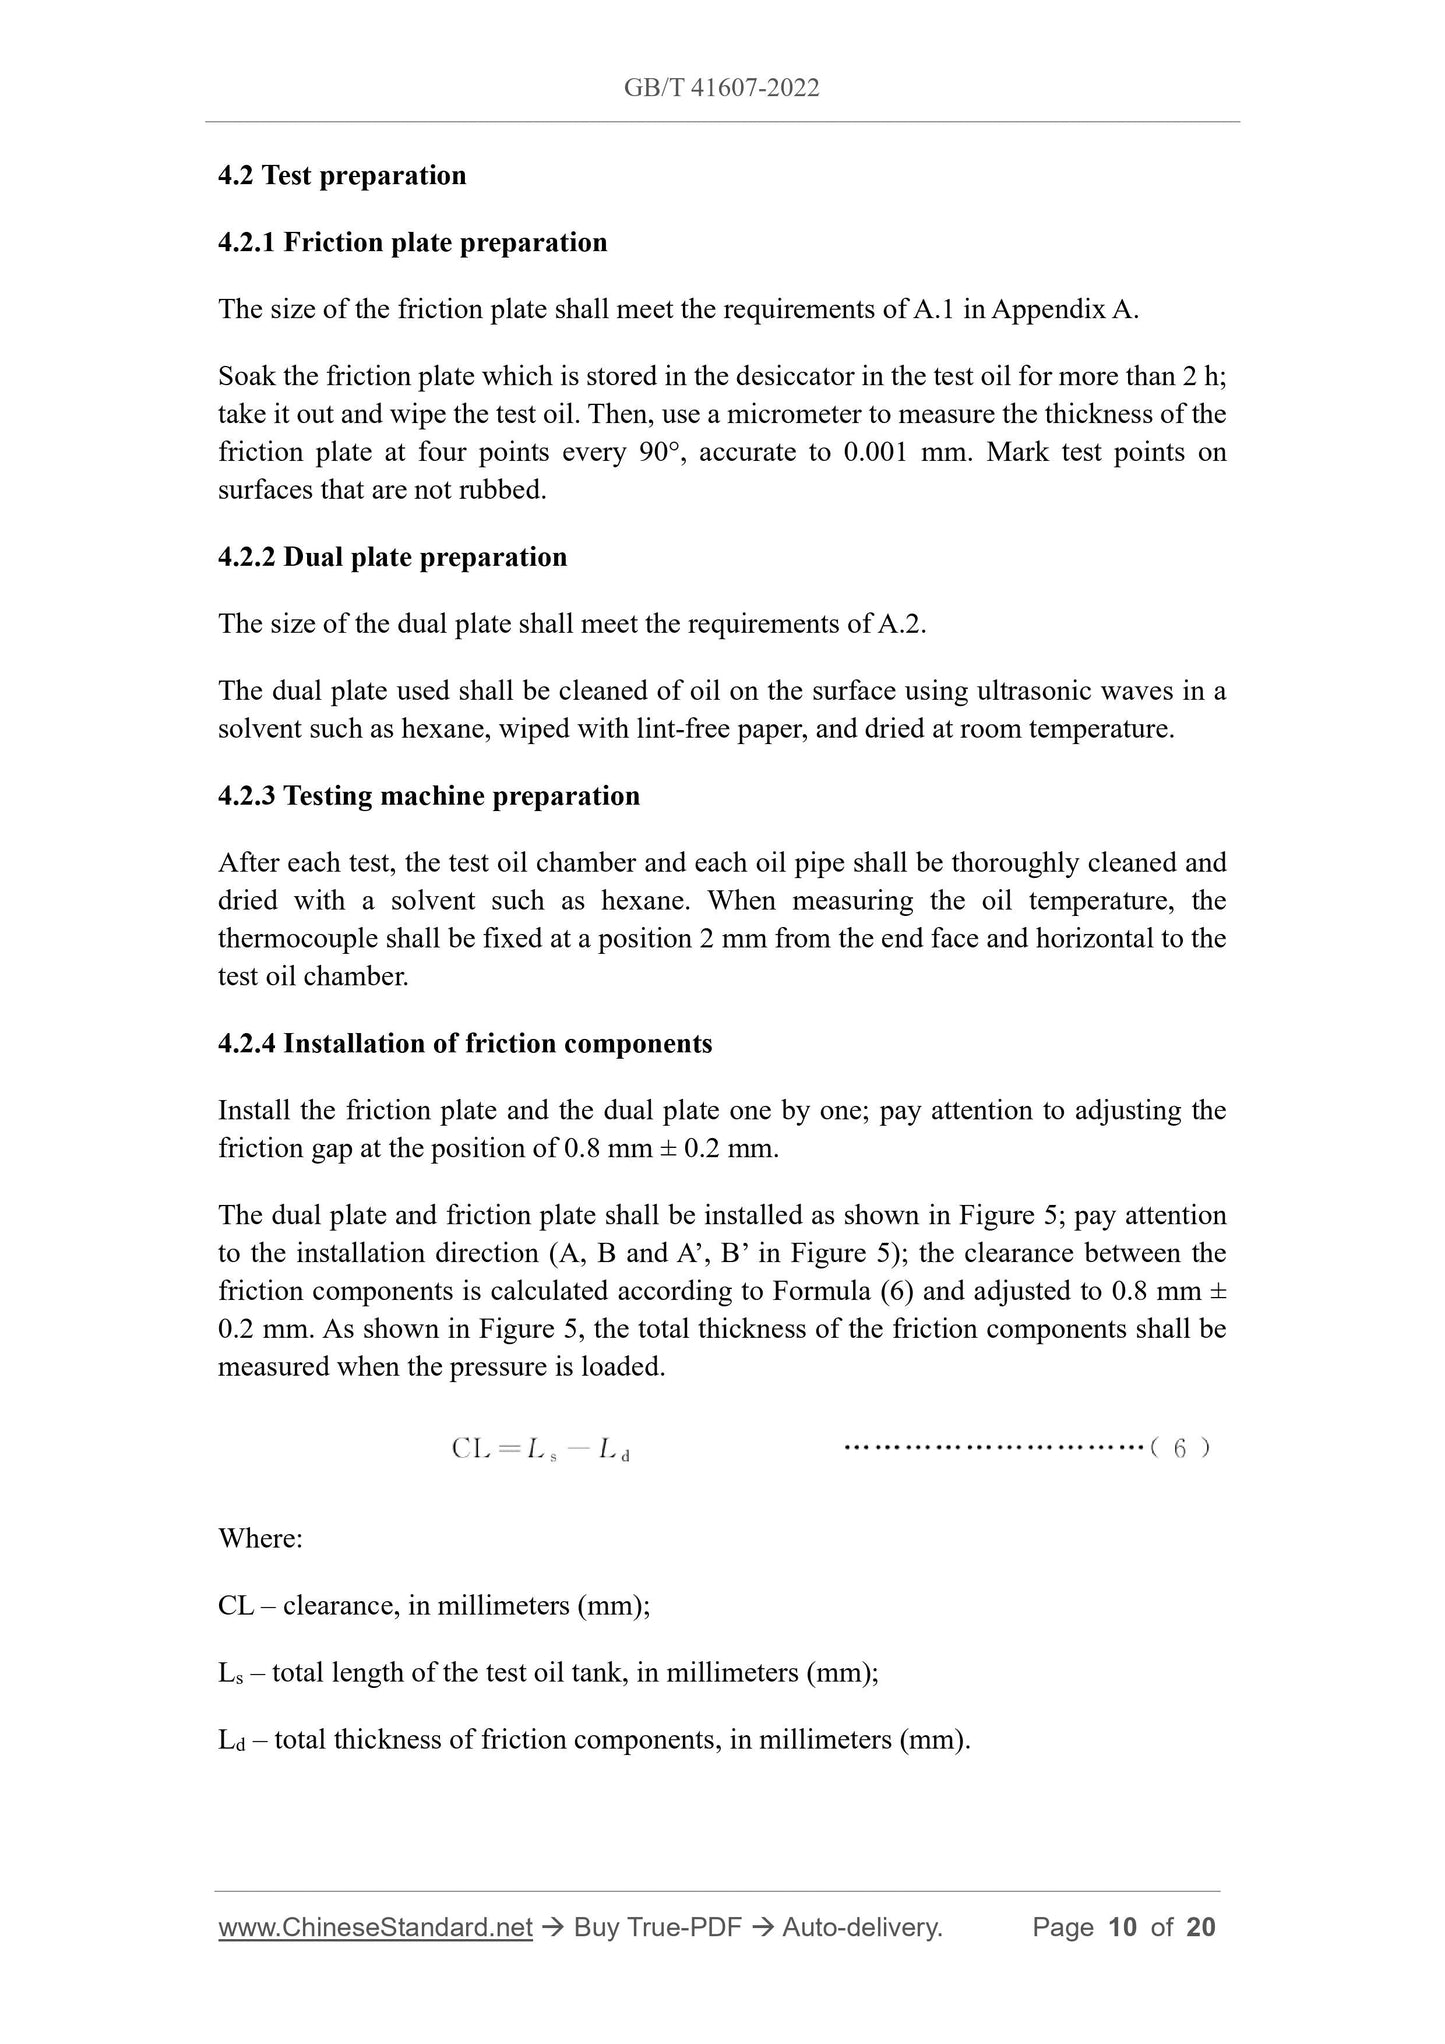 GB/T 41607-2022 Page 5